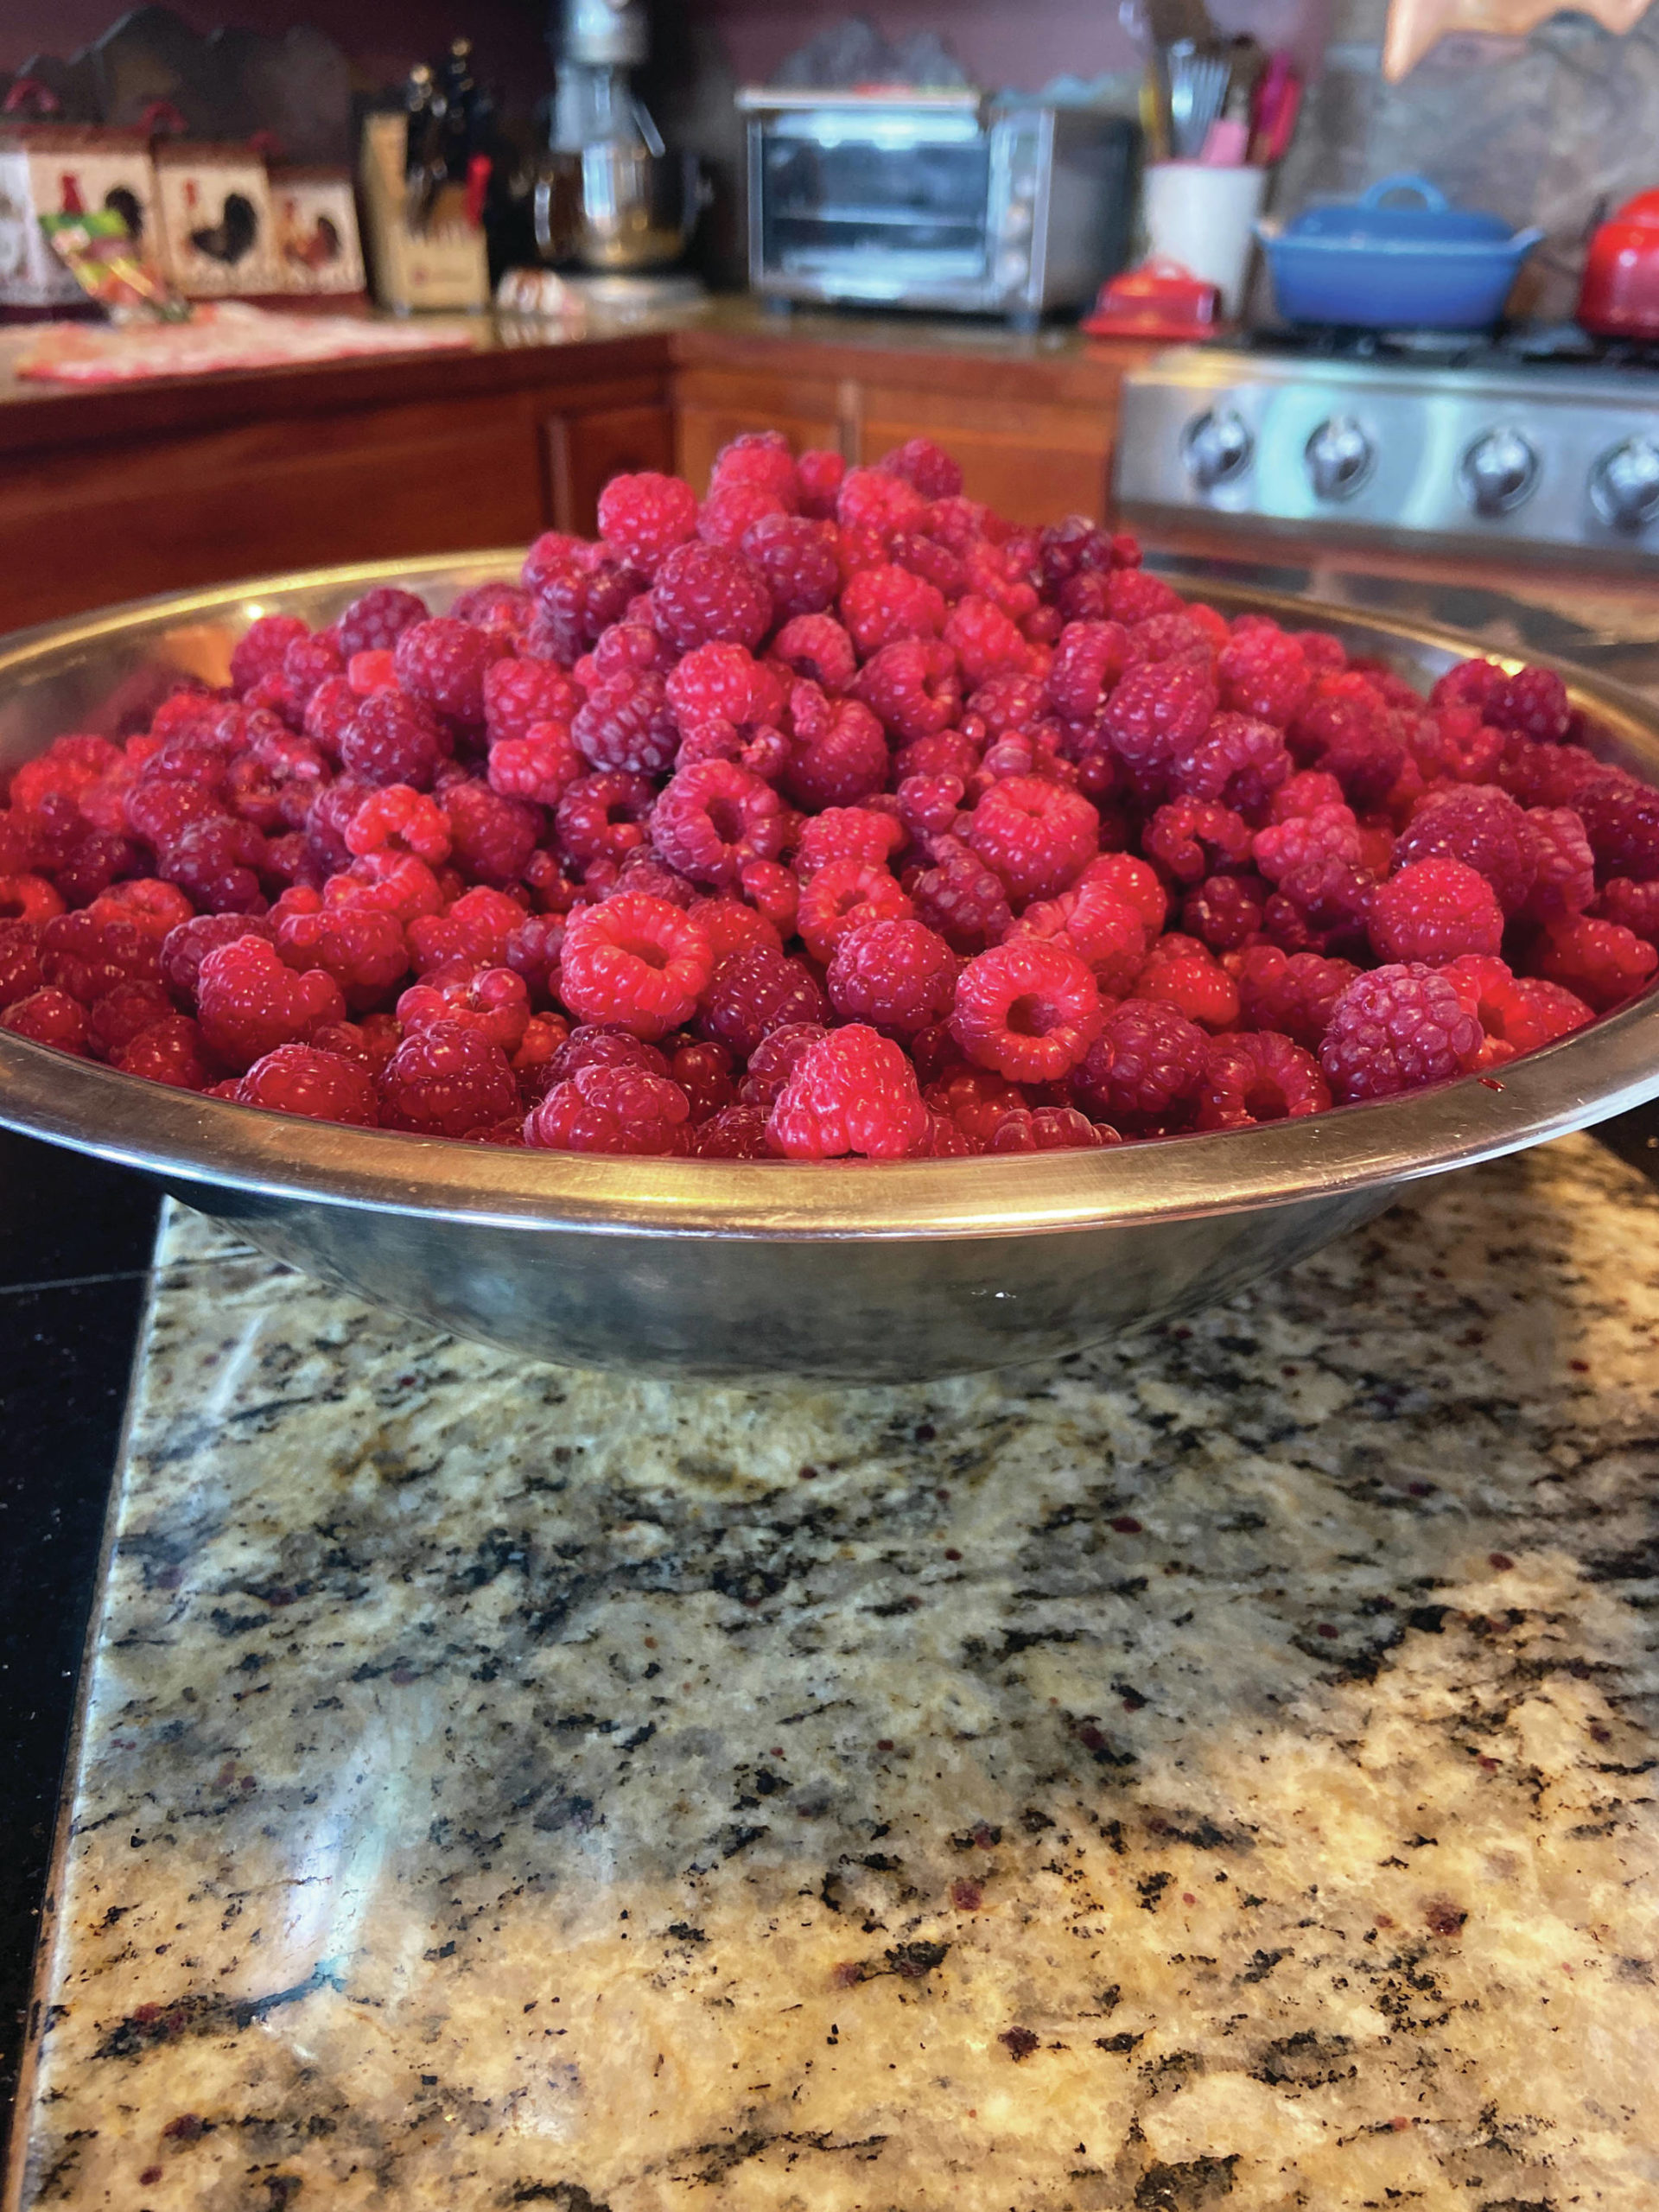 This bowl of fresh picked raspberries is an essential ingredient for a brown butter tart, as seen here in Teri Robl’s kitchen on Aug. 25, 2020, in Homer, Alaska. (Photo by Teri Robl)